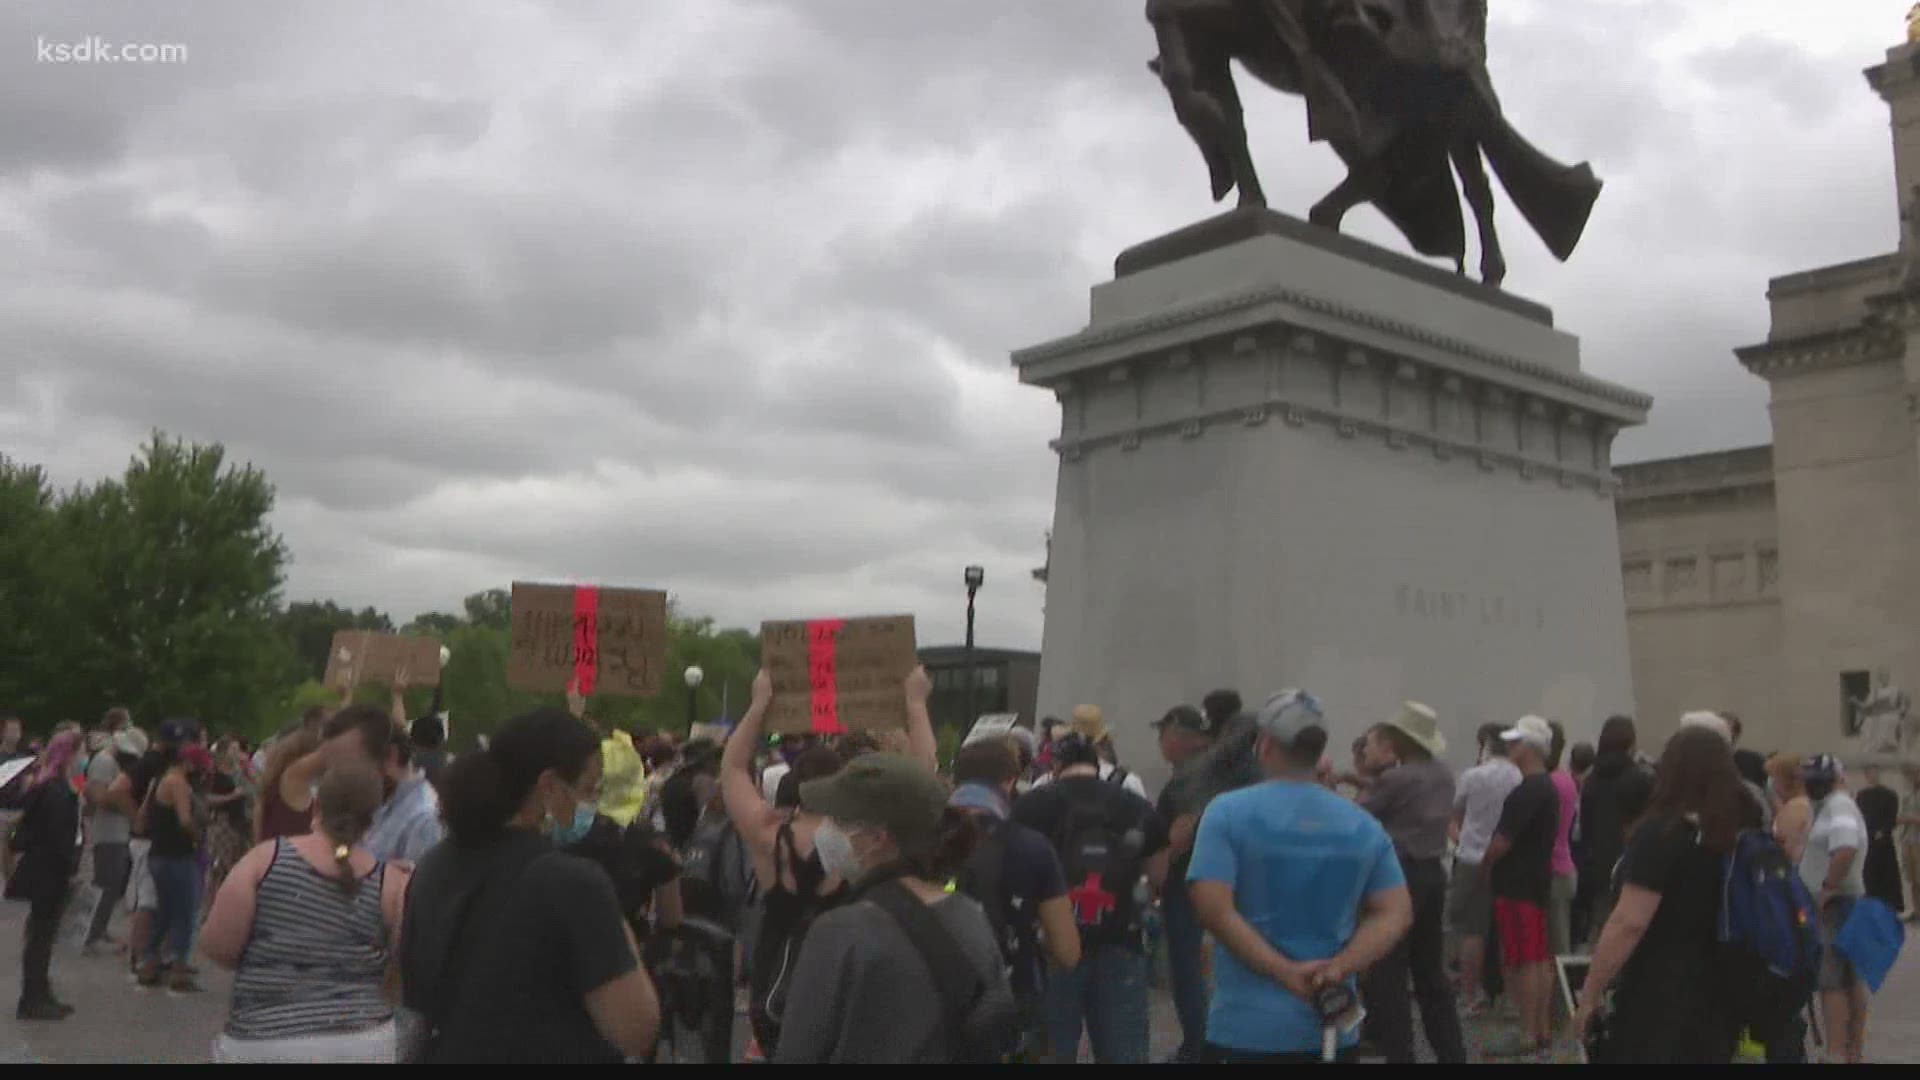 The rally kicked off around noon with hundreds of people. Some protesters used chalk to cross out the word "saint" and write what the statue means to them